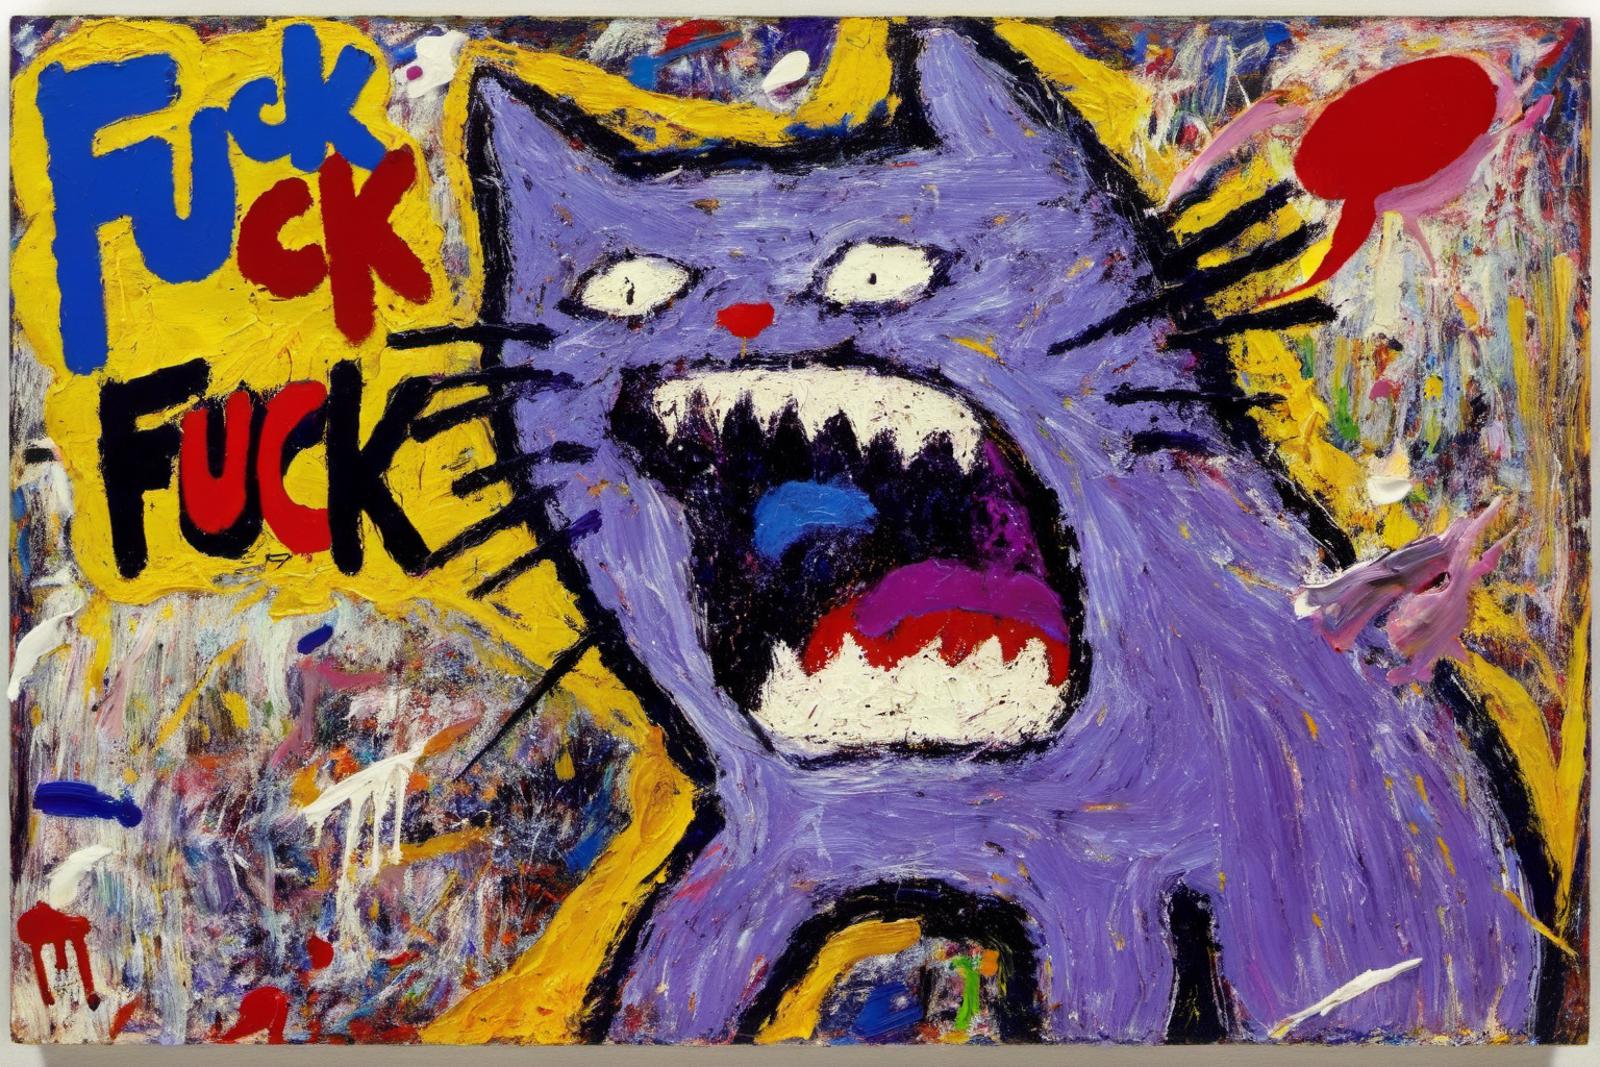 A large purple cat with a mouth open on a colorful background.